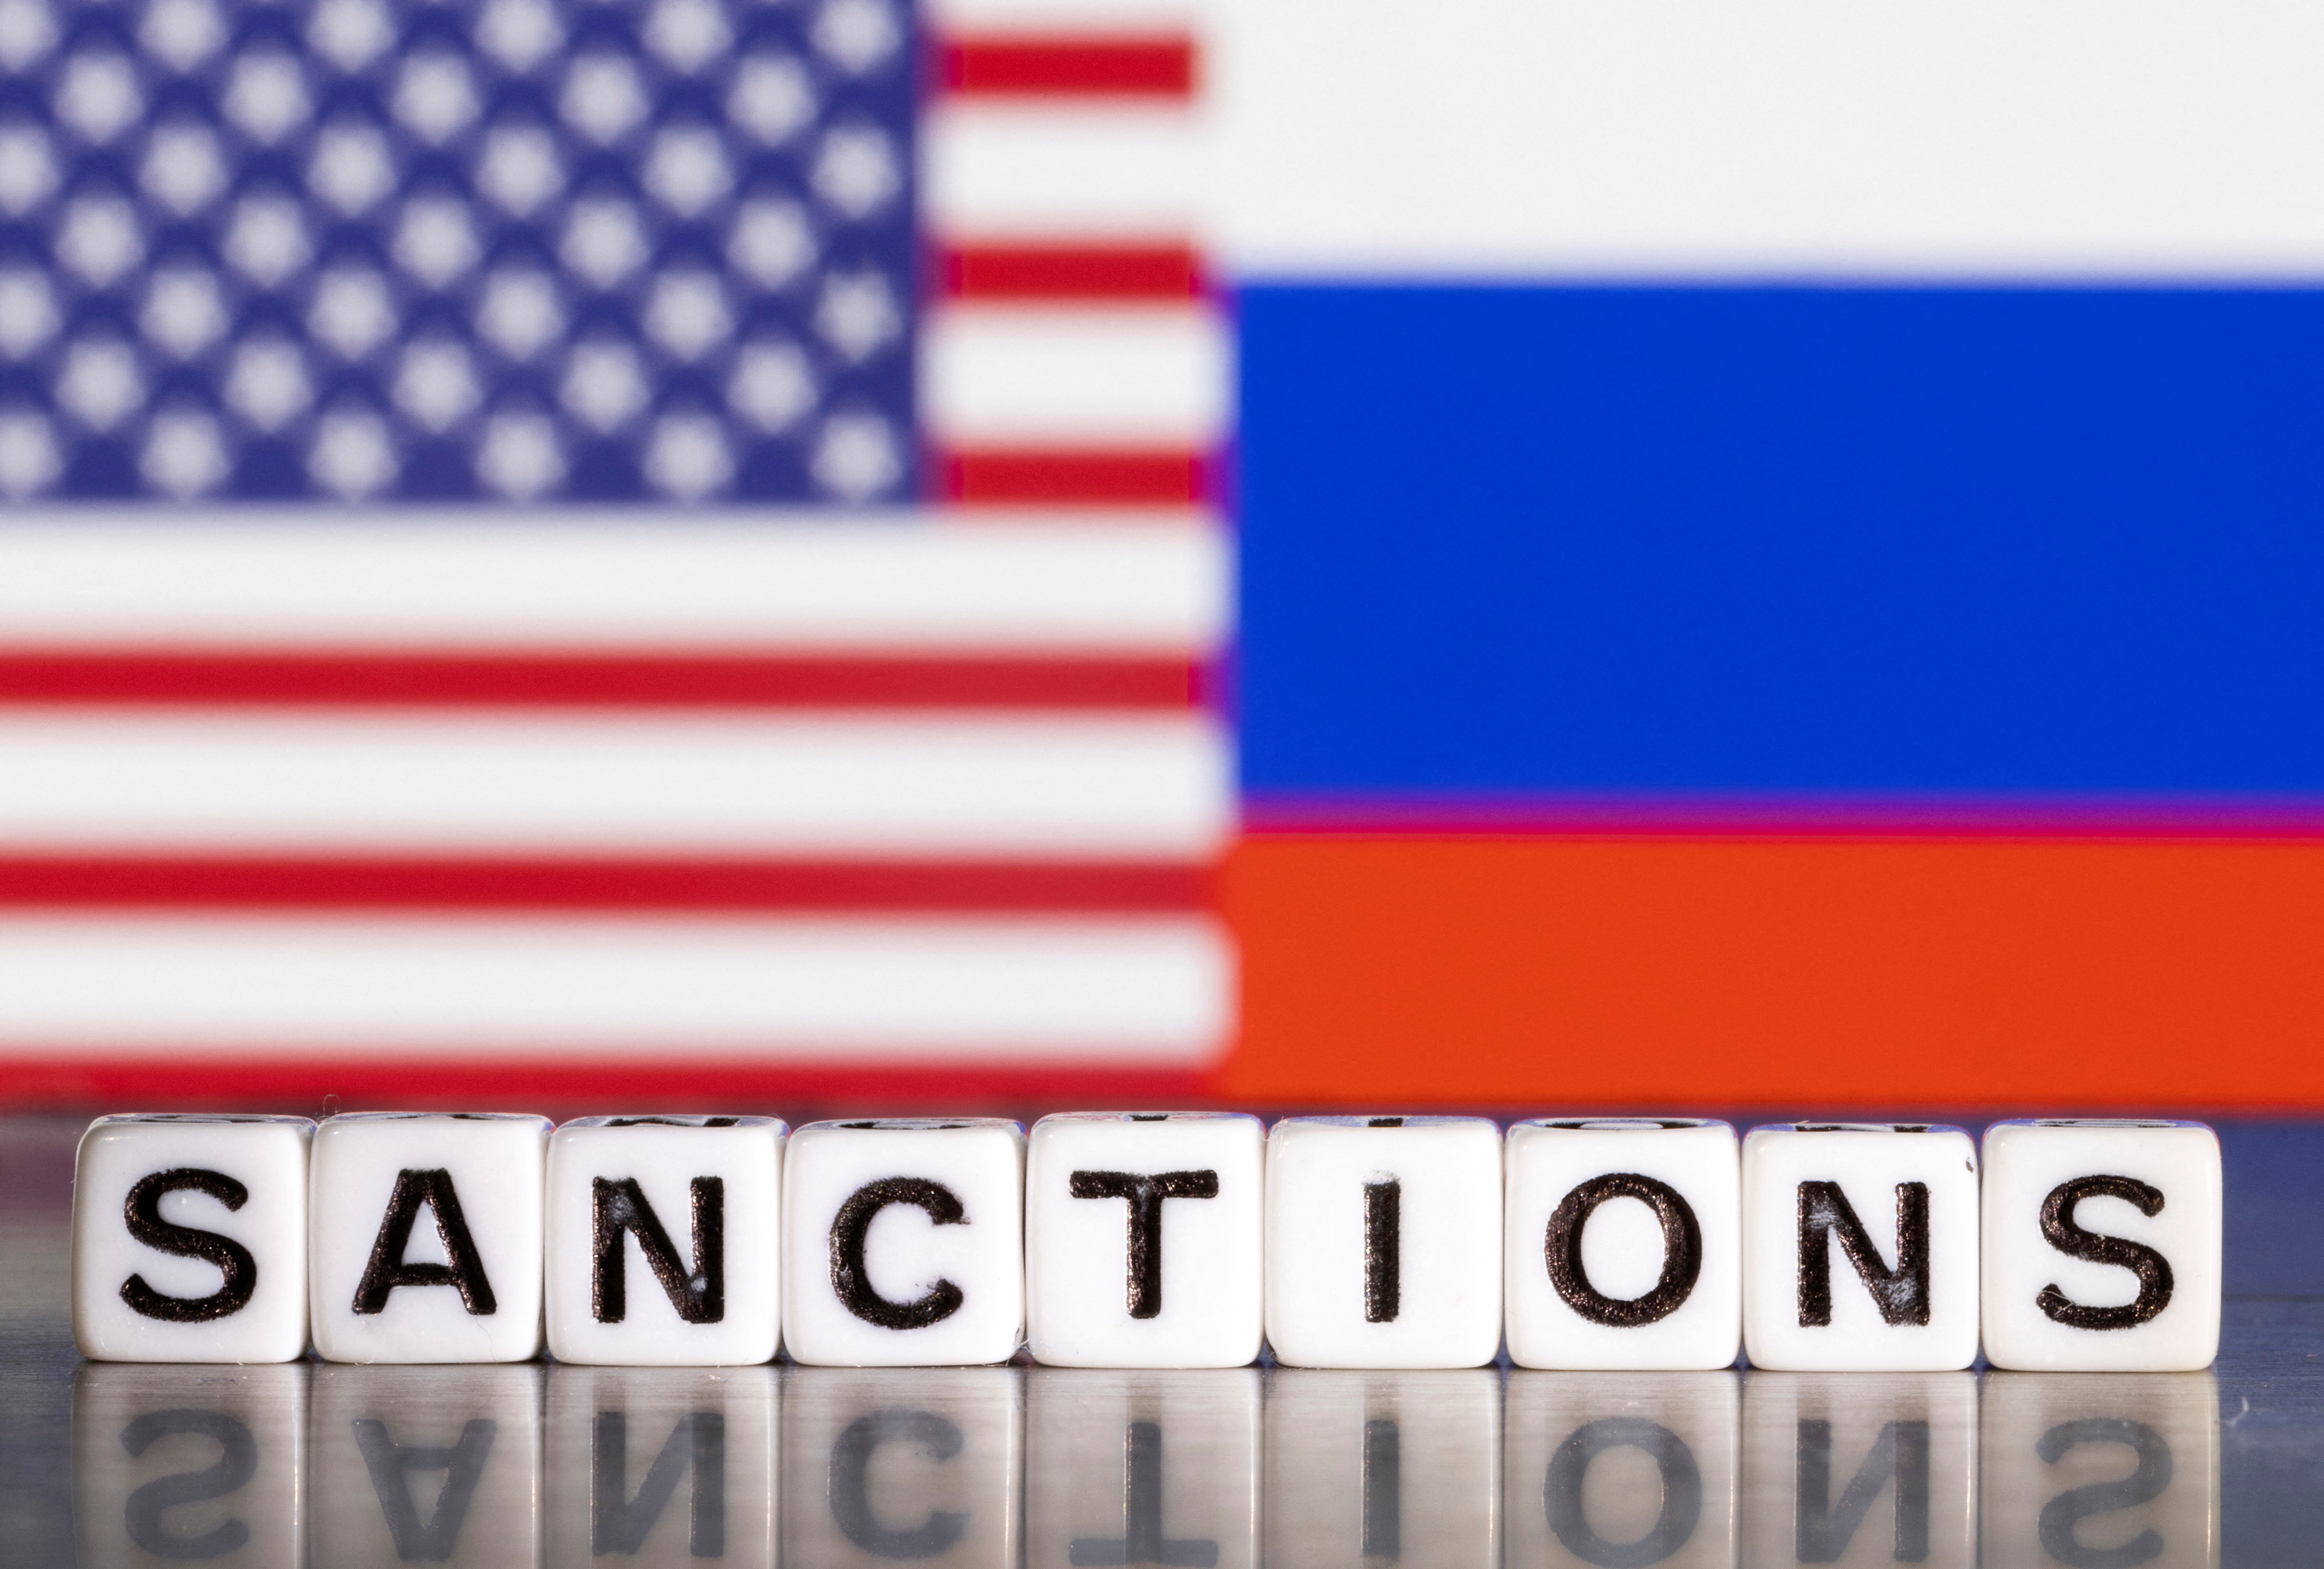 Illustration shows letters arranged to read "Sanctions" in front of flag colors of U.S. and Russia